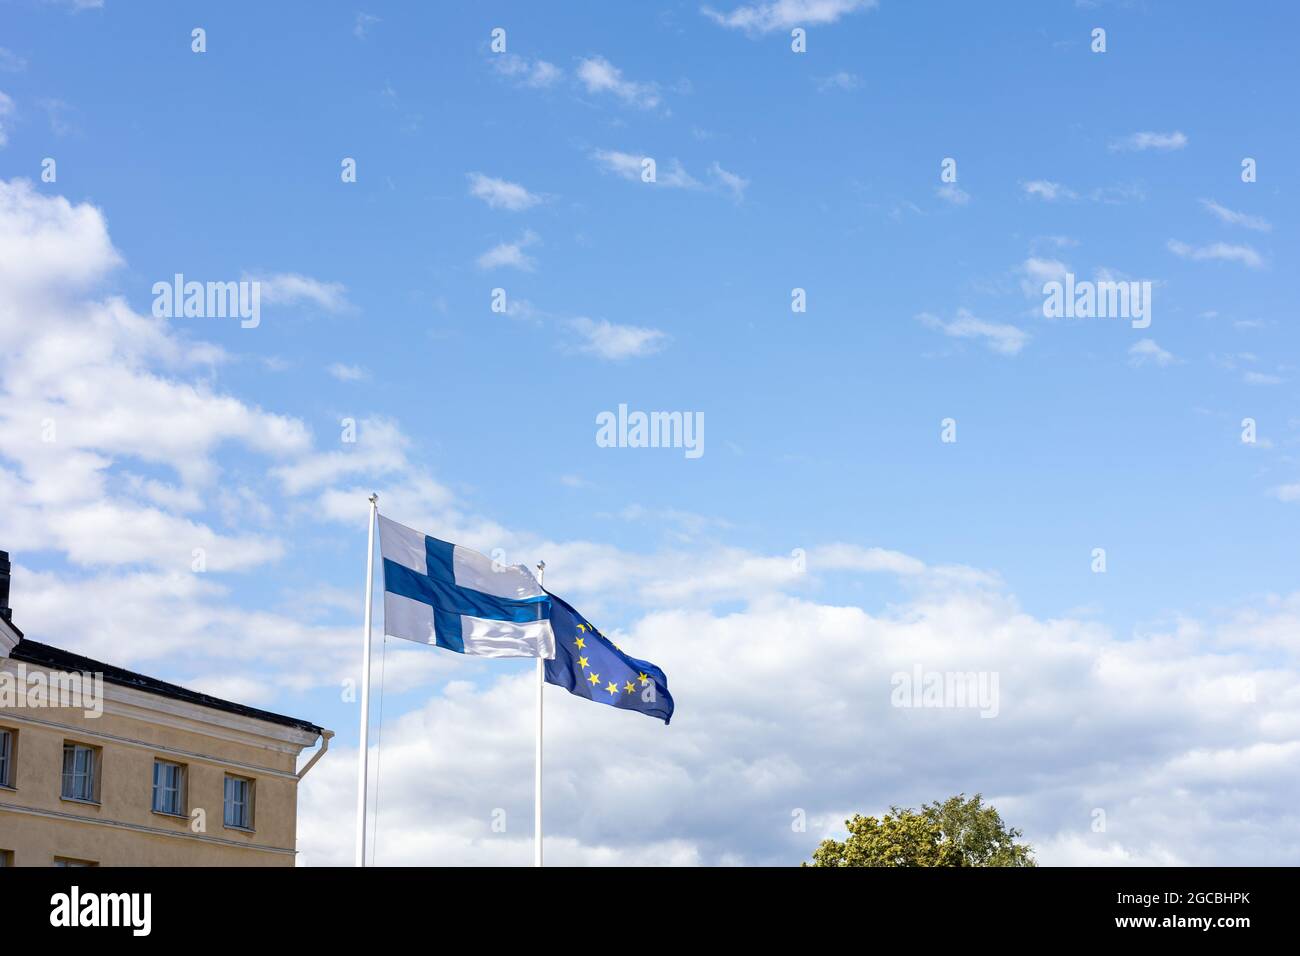 The Finnish and EU flags flapping in the wind Stock Photo